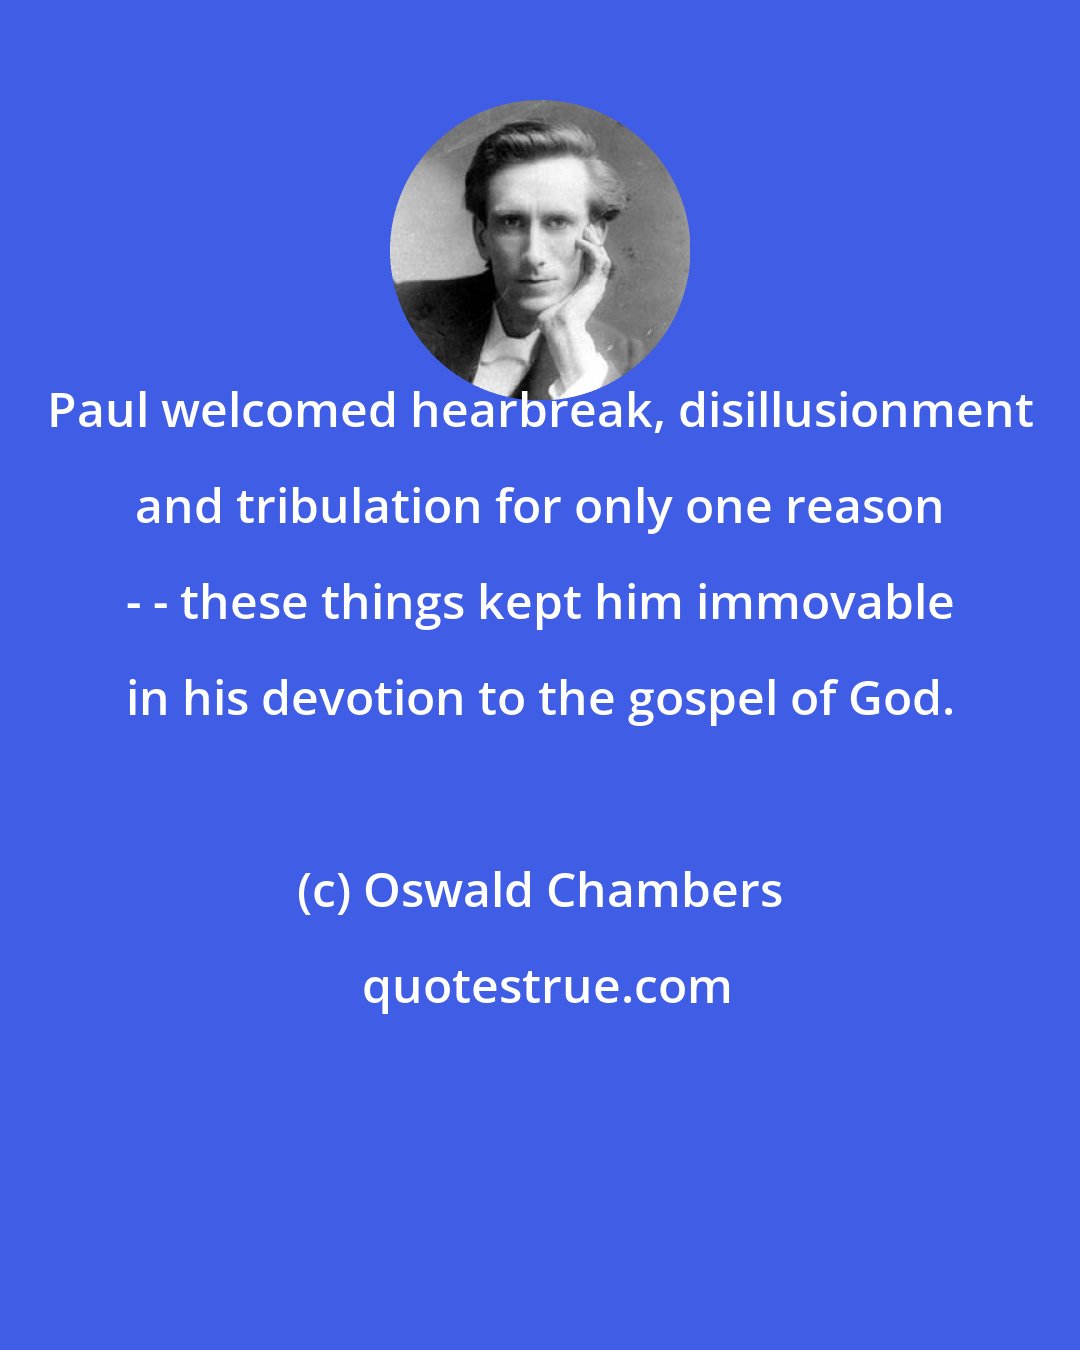 Oswald Chambers: Paul welcomed hearbreak, disillusionment and tribulation for only one reason - - these things kept him immovable in his devotion to the gospel of God.